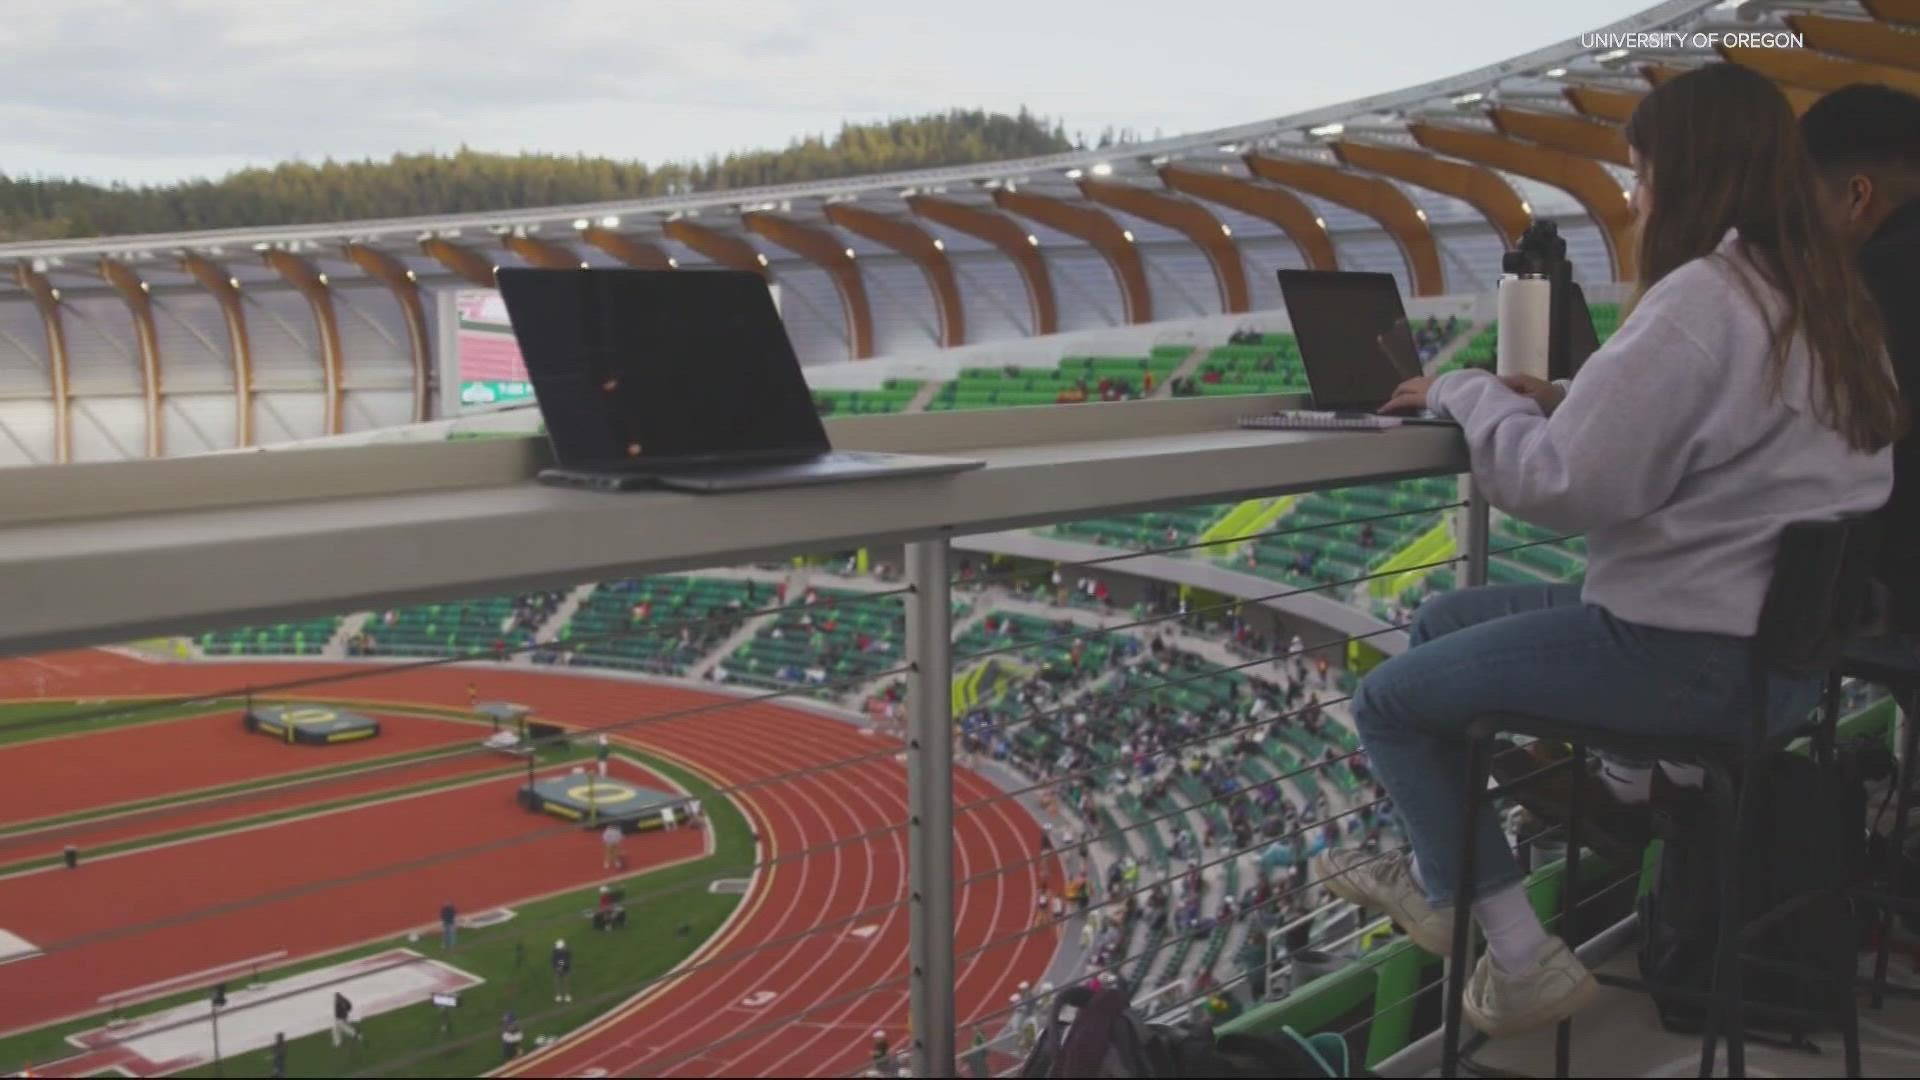 Eight students in the university's Track Bureau will report, post on social media and interview athletes as part of a paid internship partnership with Oregon22.